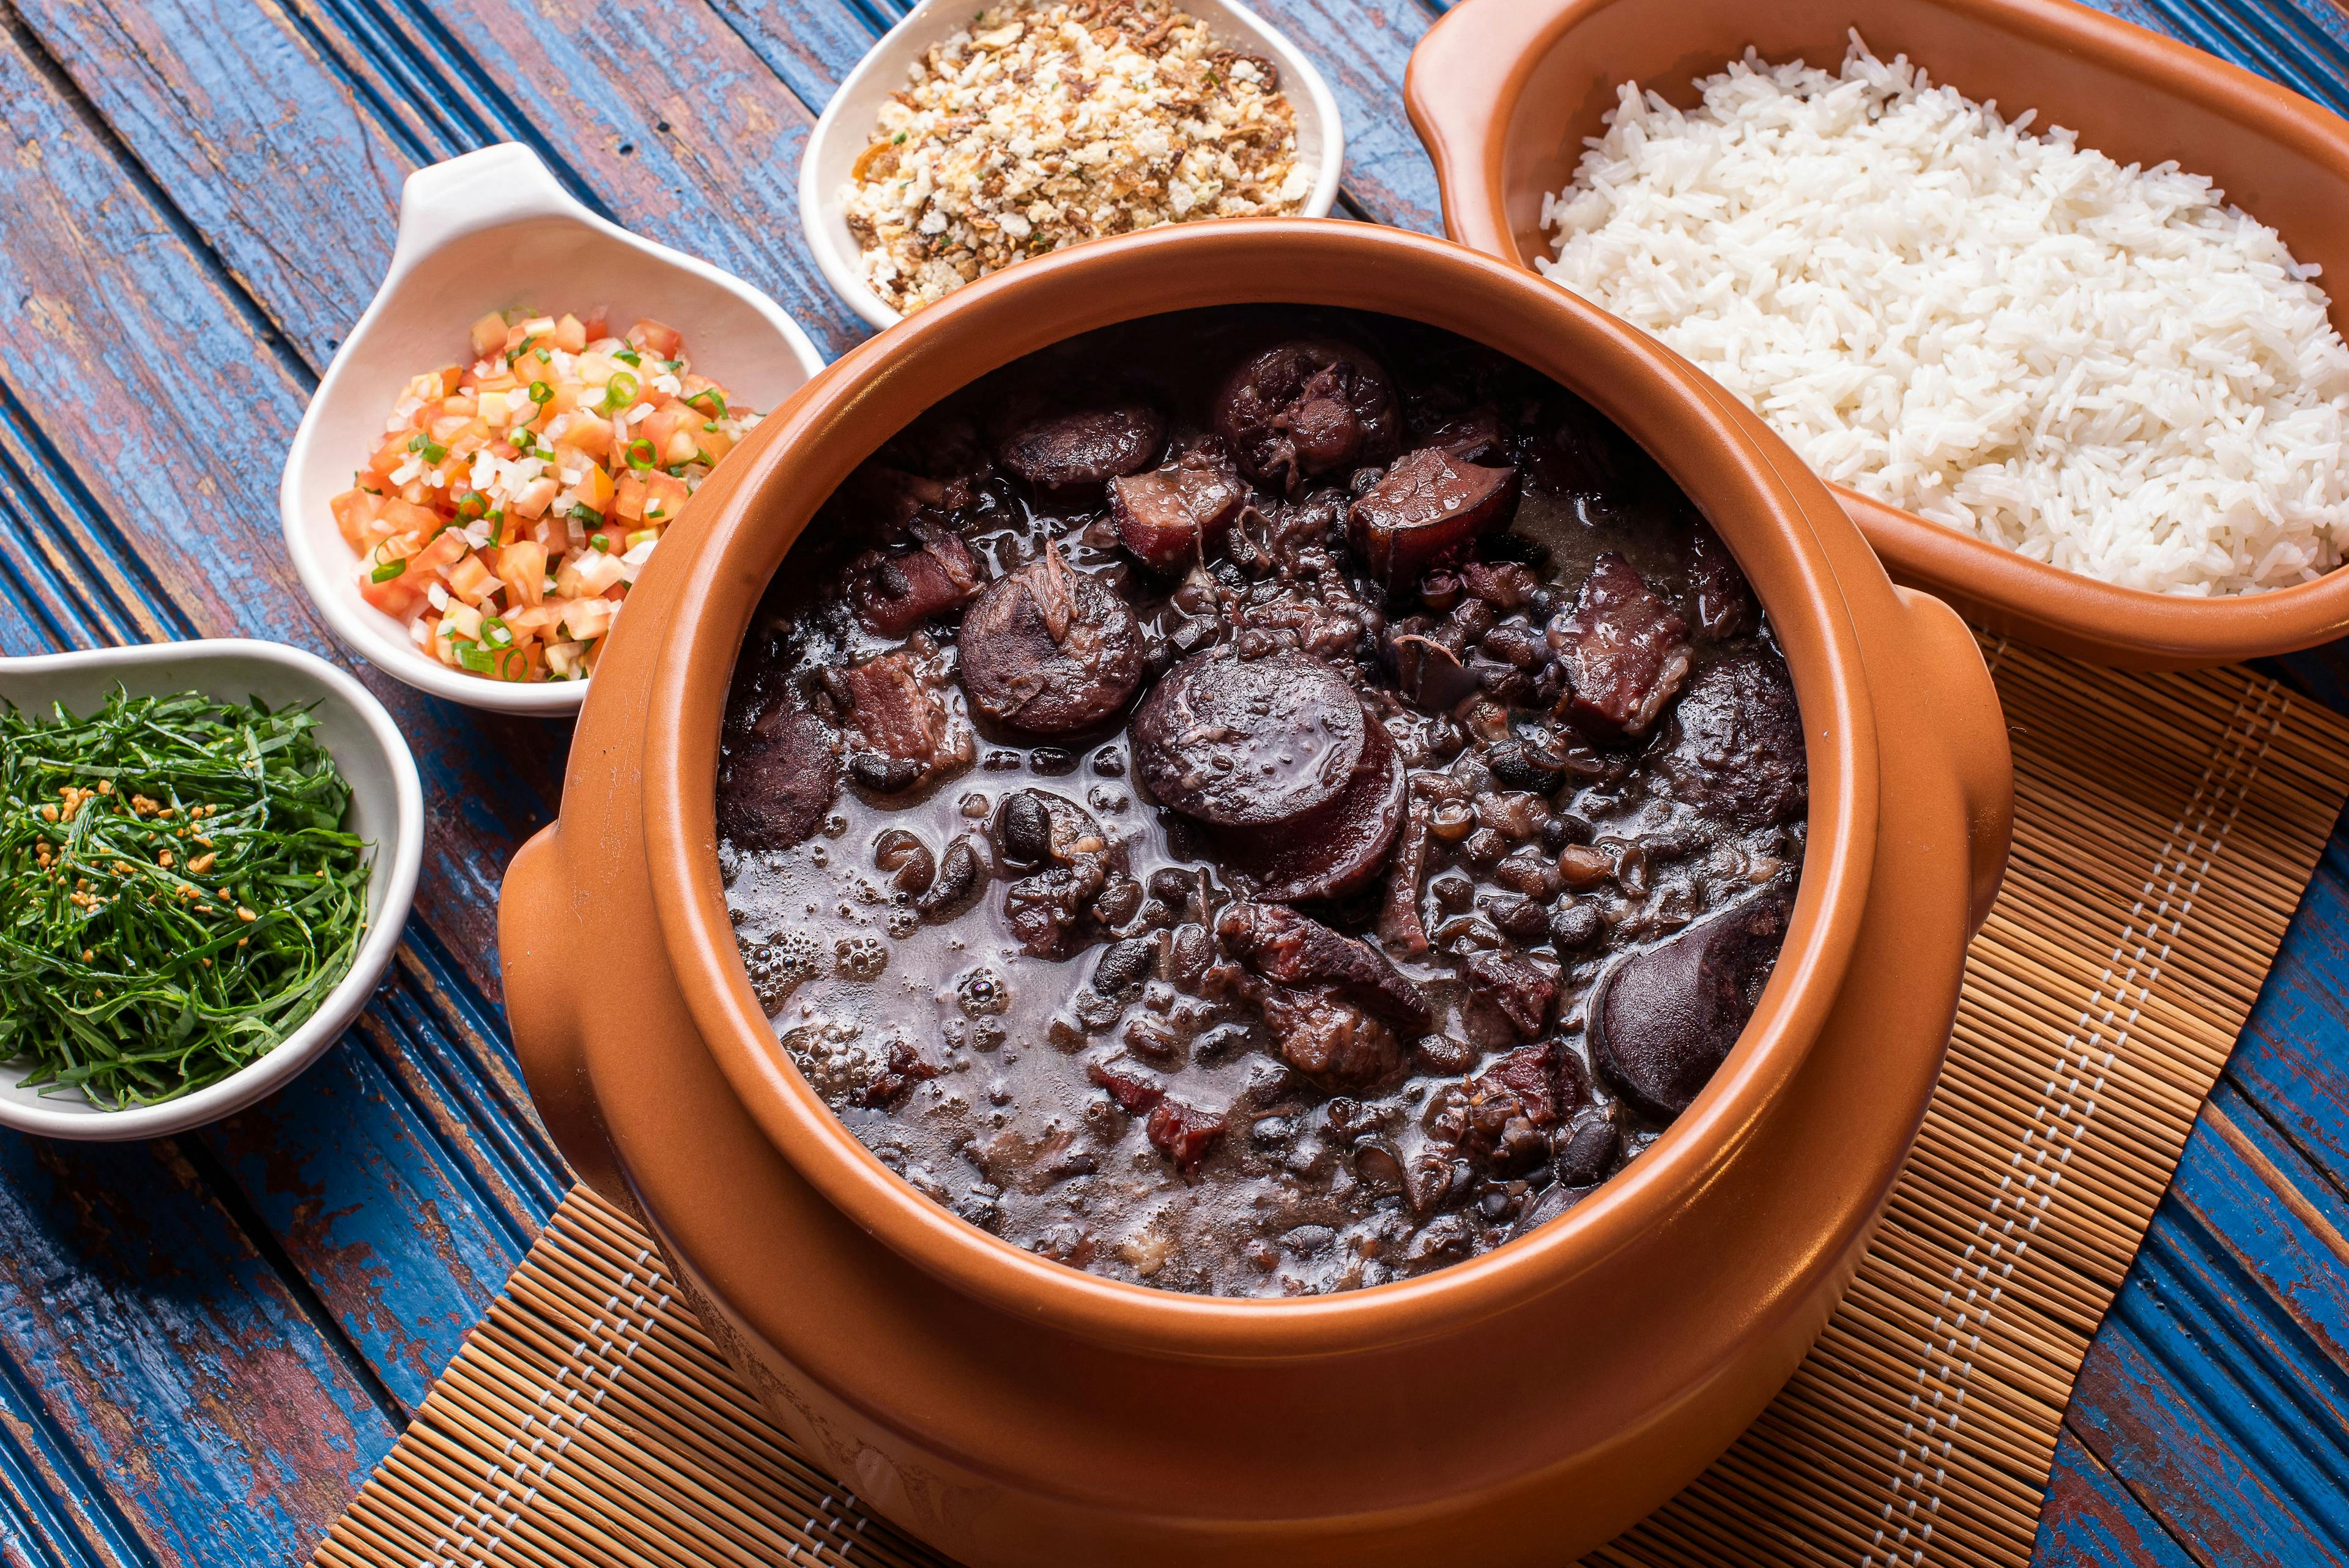 Traditional Brazilian food called feijoada. Black beans with pork